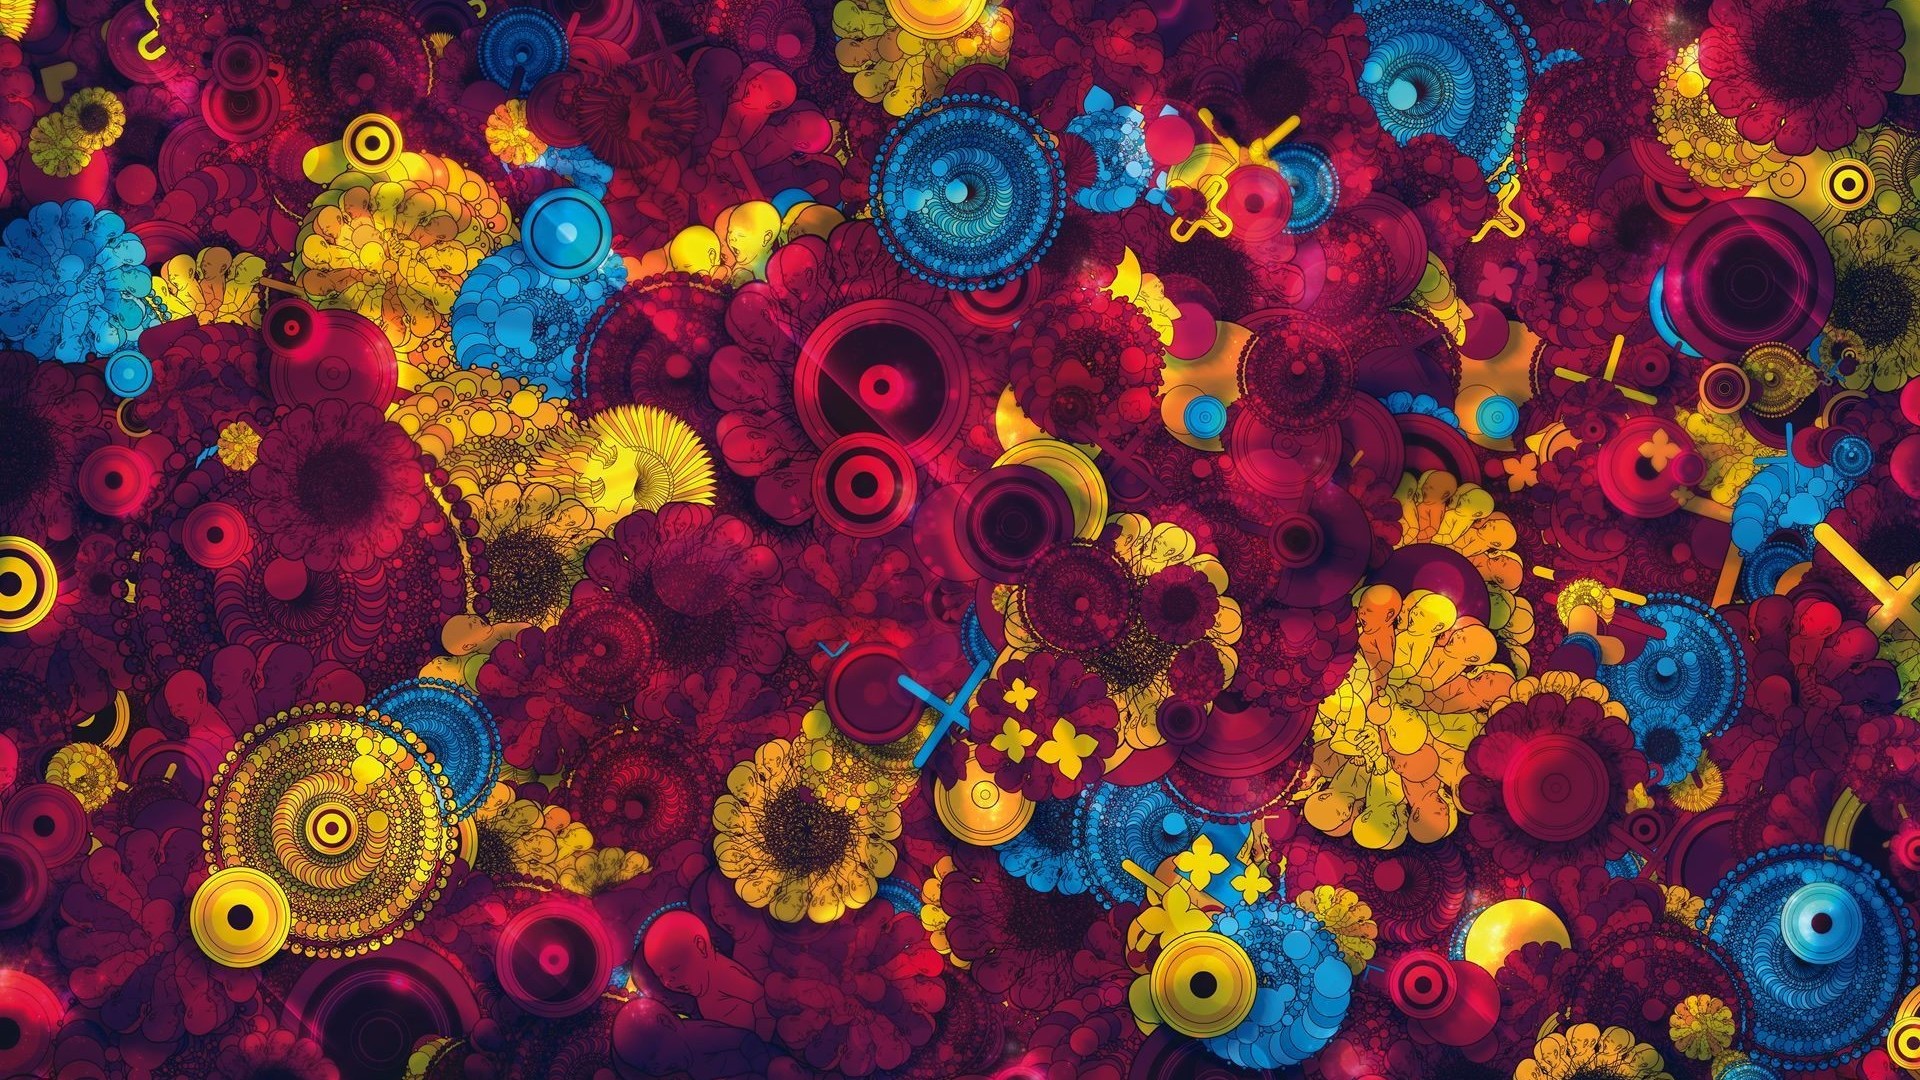 Wallpaper HD Psychedelic 1920x1080